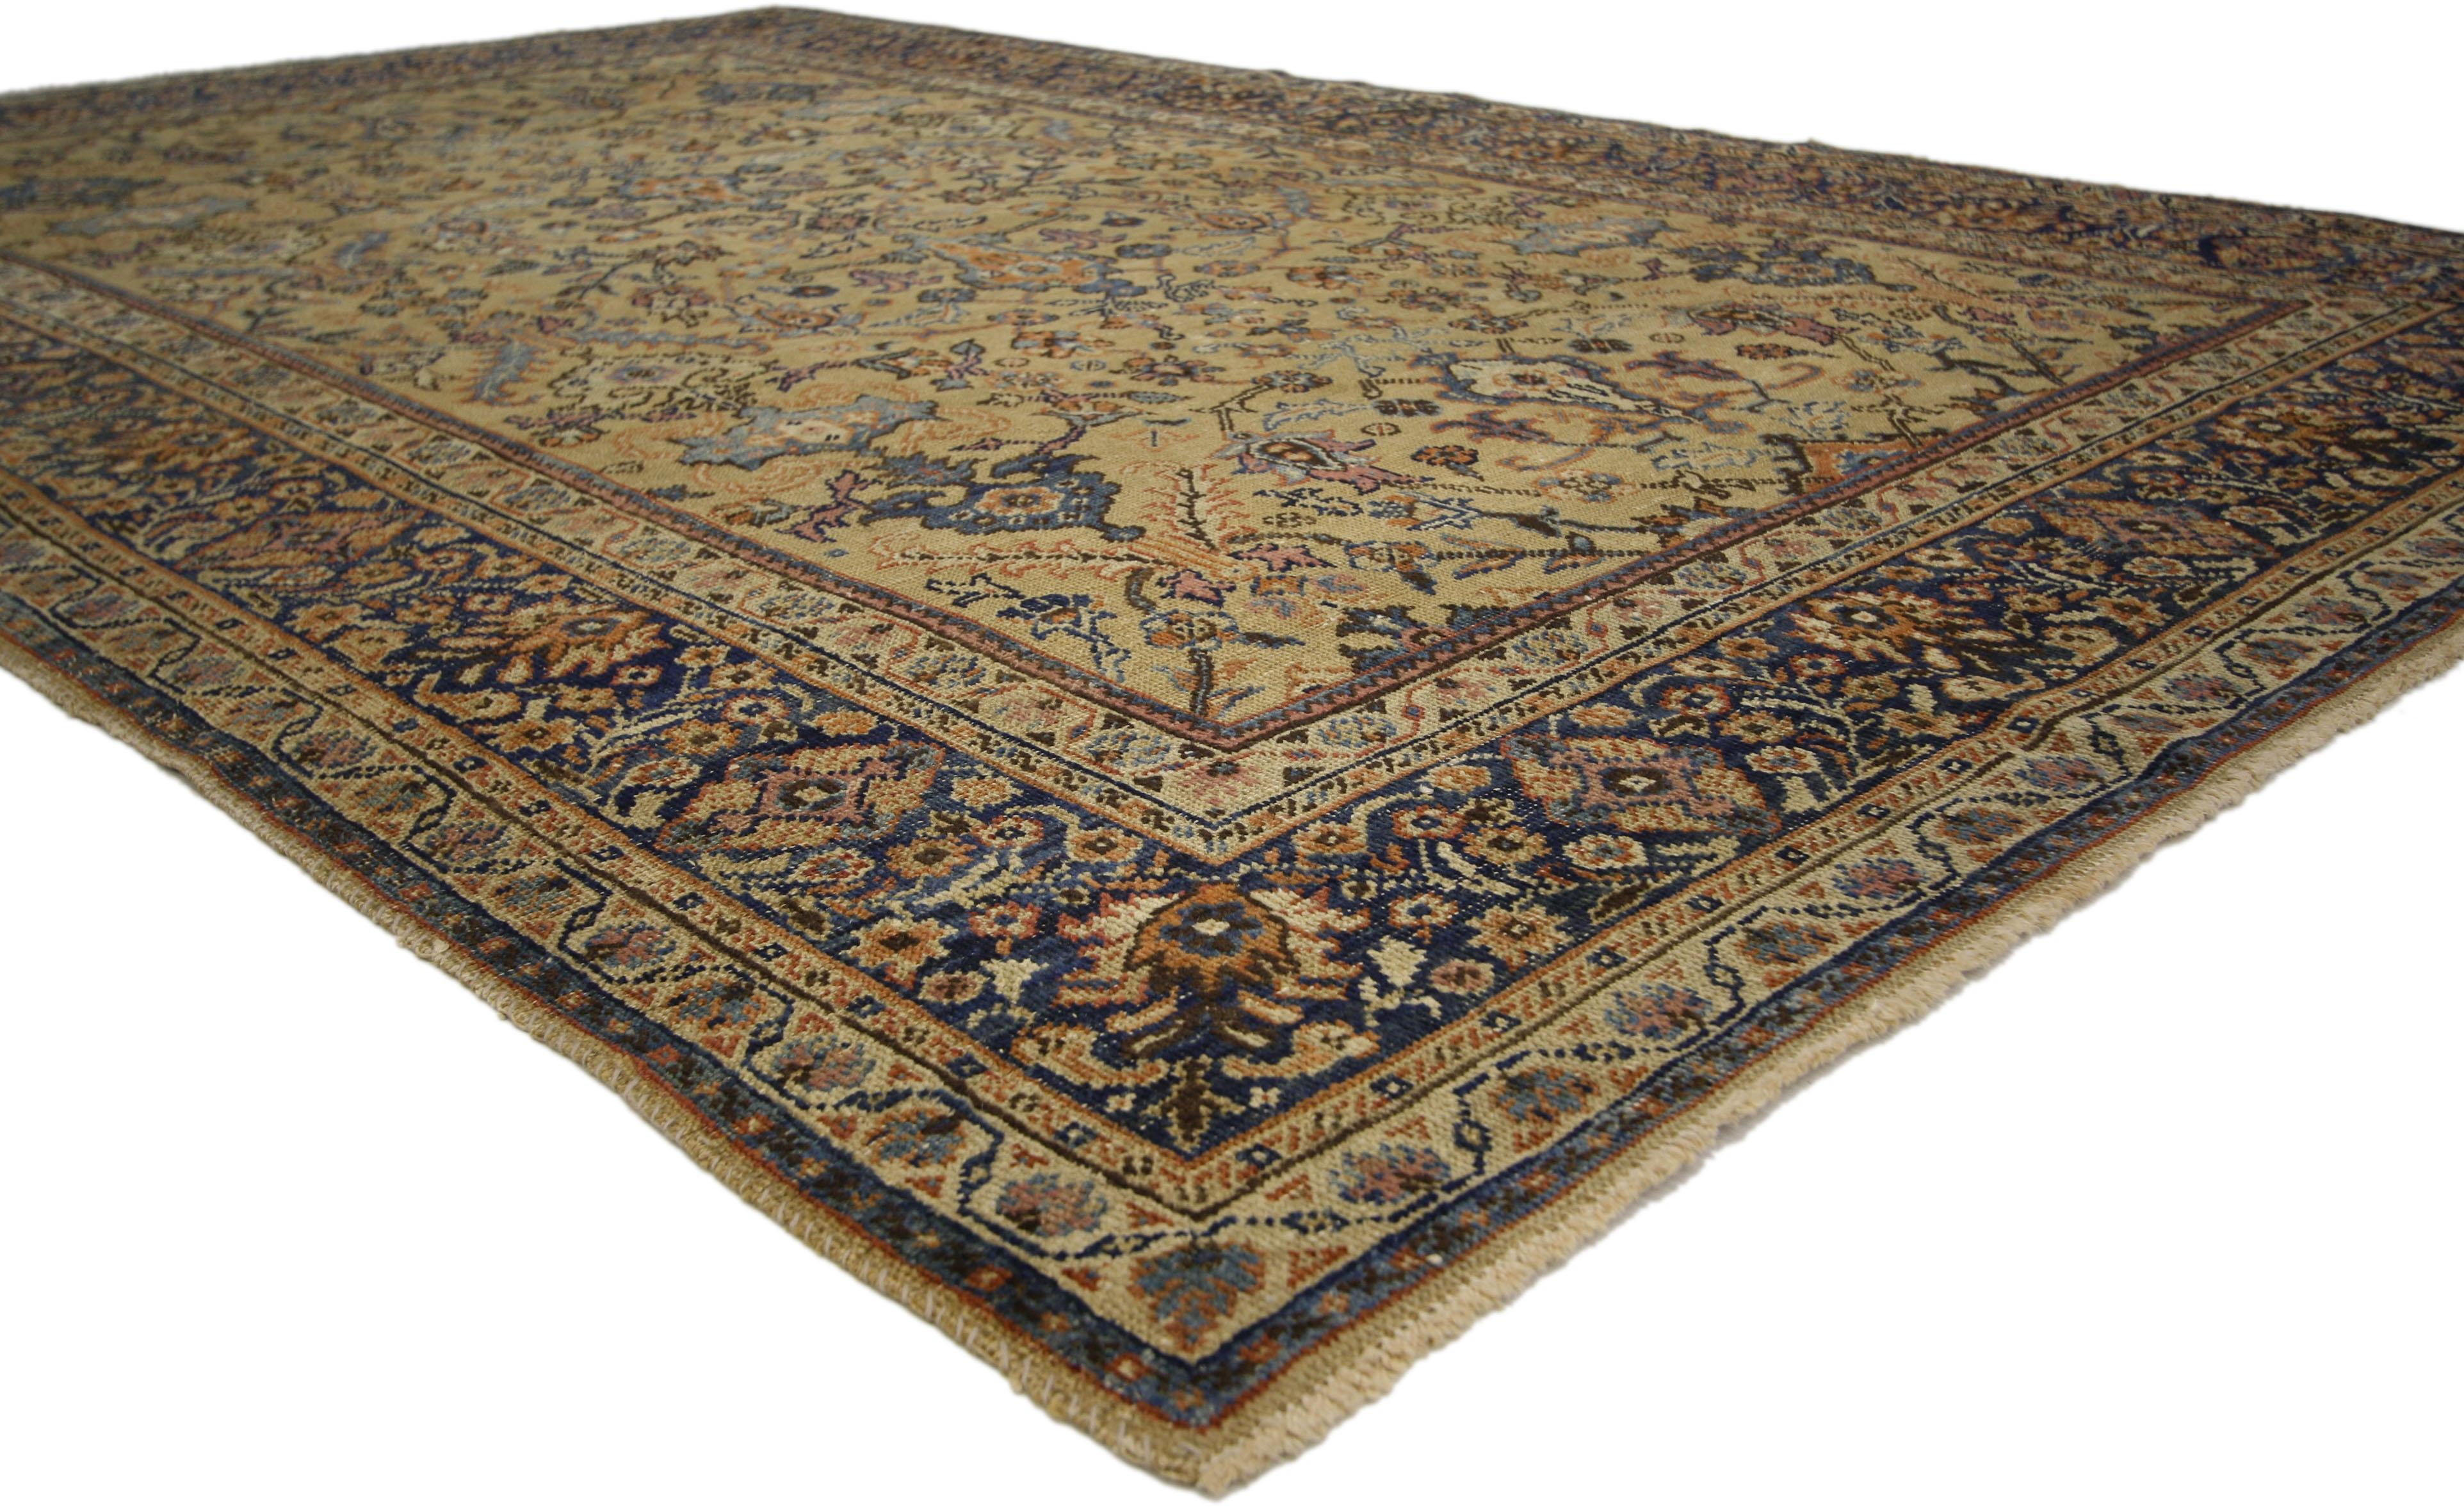 74036 Distressed Antique Persian Sultanabad Rug with Rustic Spanish Colonial Style 06'04 x 09'10. This hand knotted wool distressed antique Persian Sultanabad rug features an all-over floral lattice composed of palmettes, rosettes, leafy tendrils,